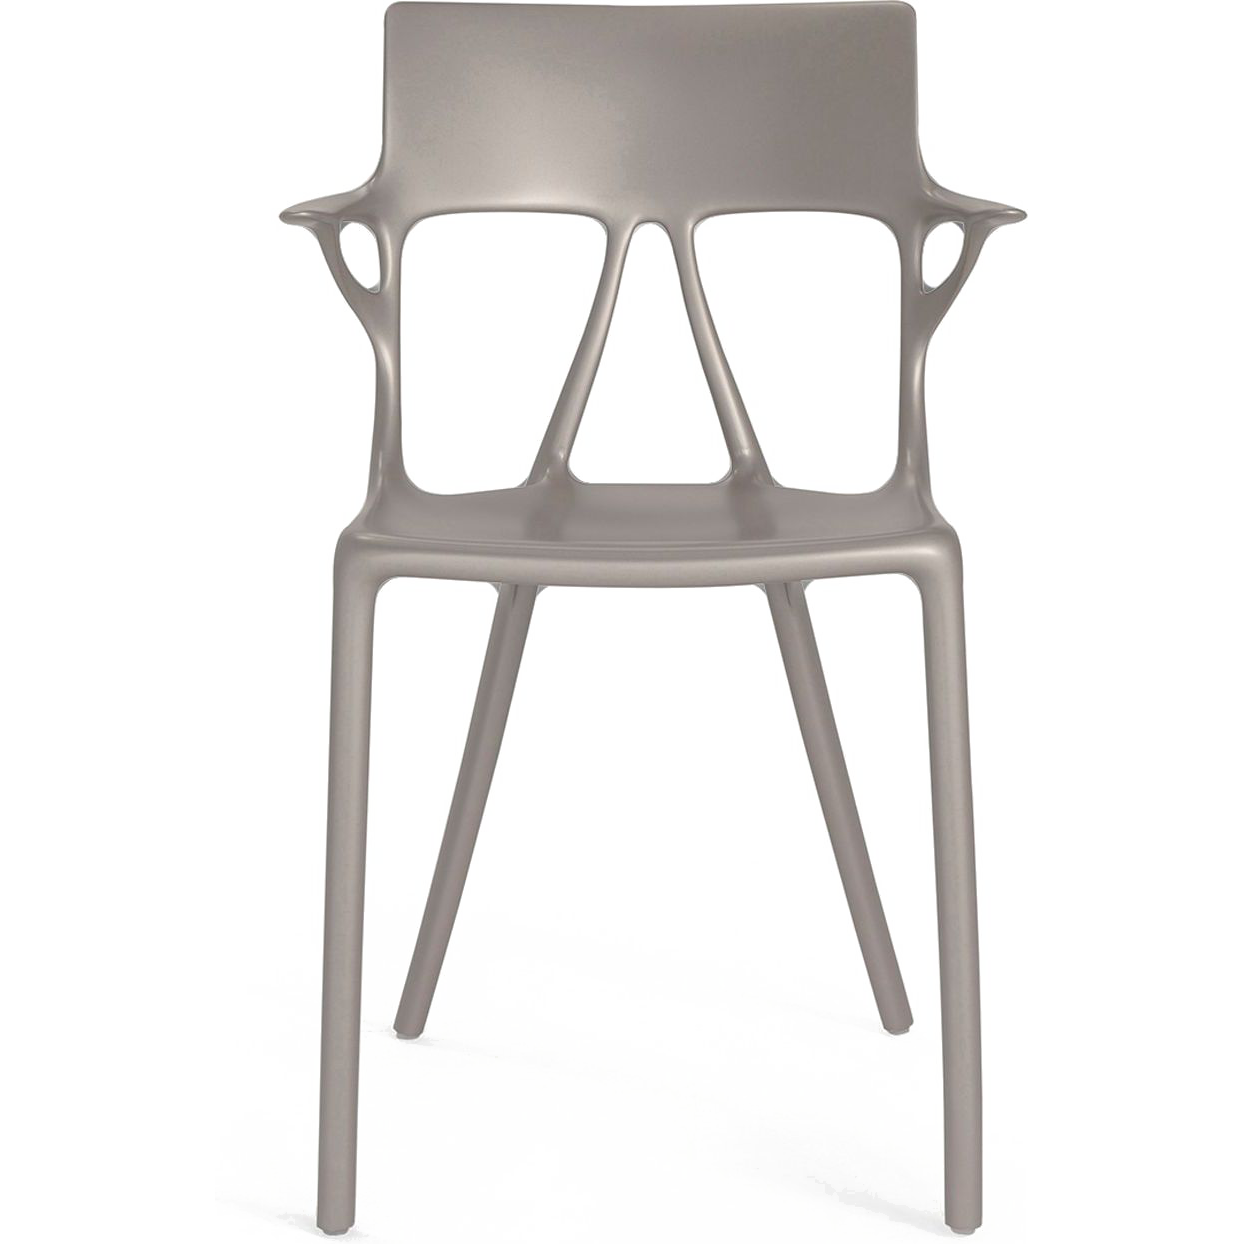 A.I. Chair